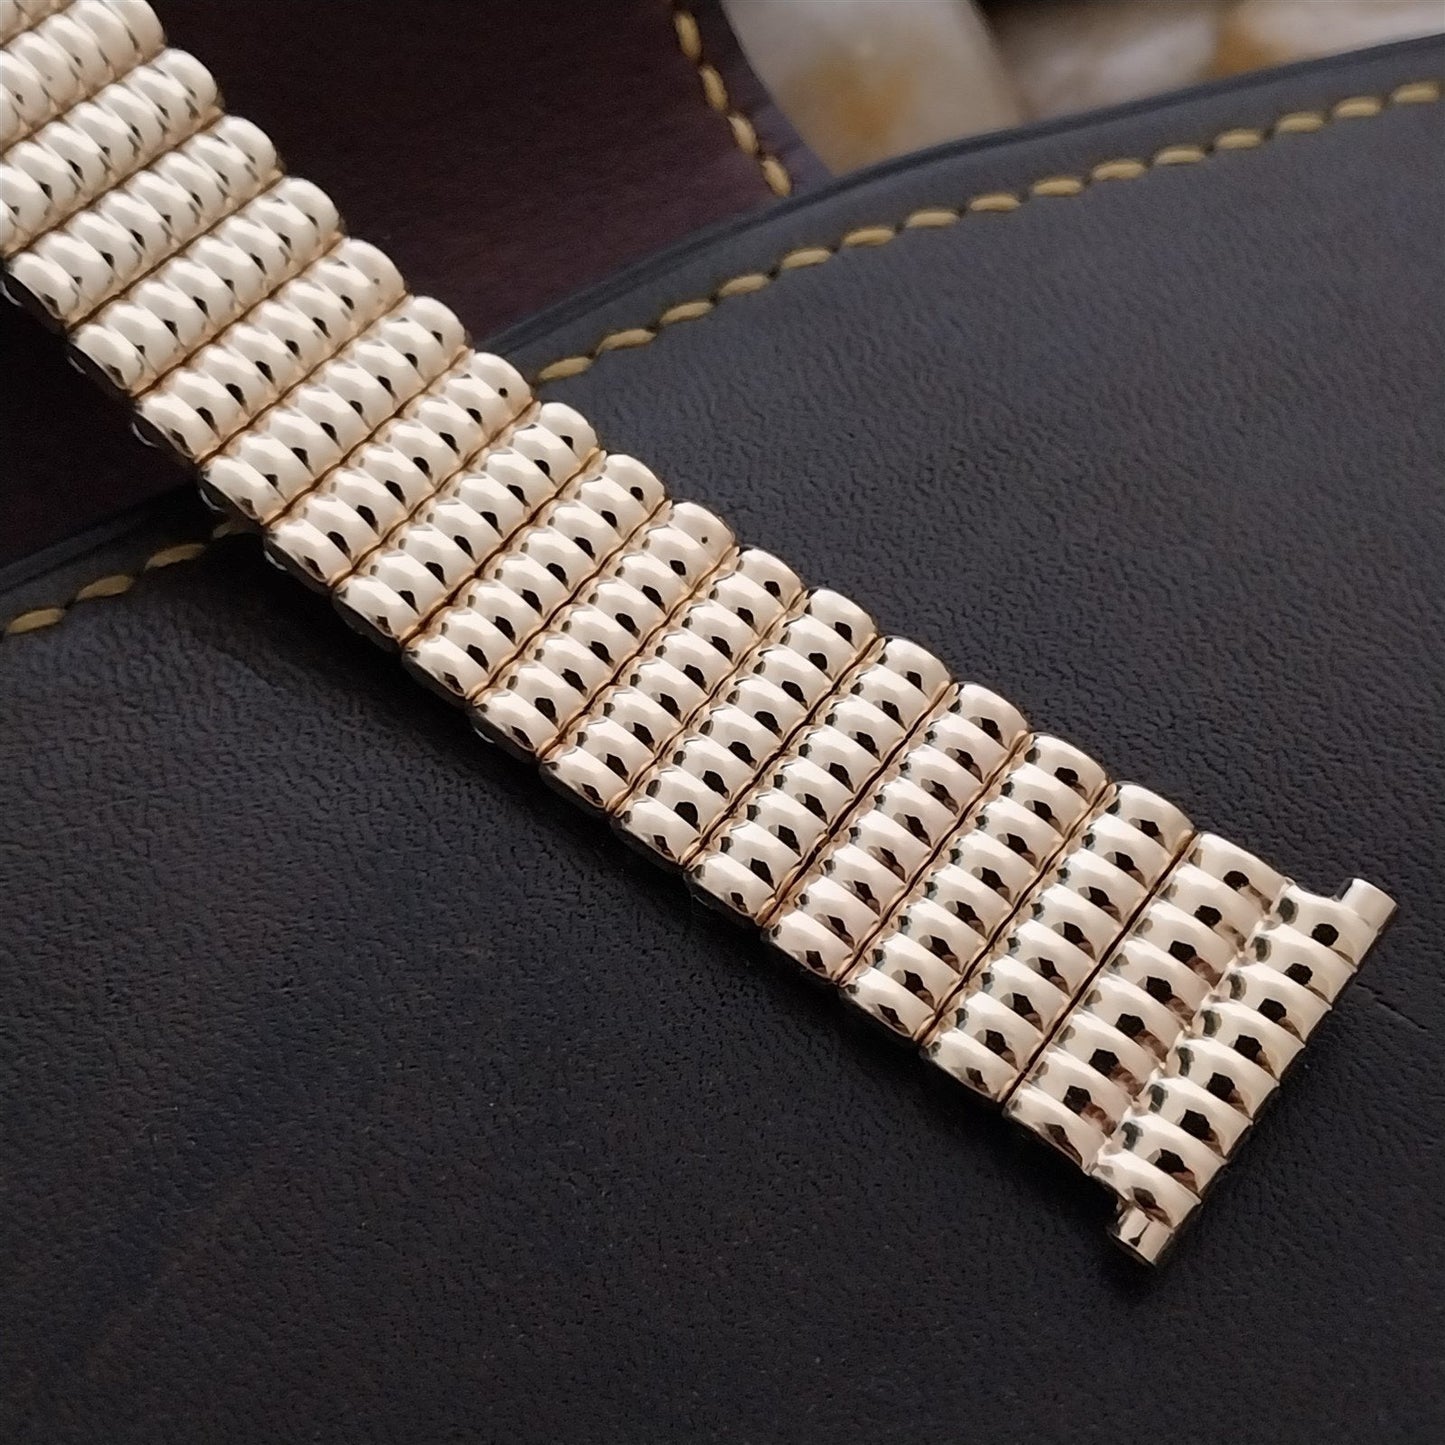 19mm 18mm JB Champion American Patriot Gold-Filled Expansion Unused Watch Band